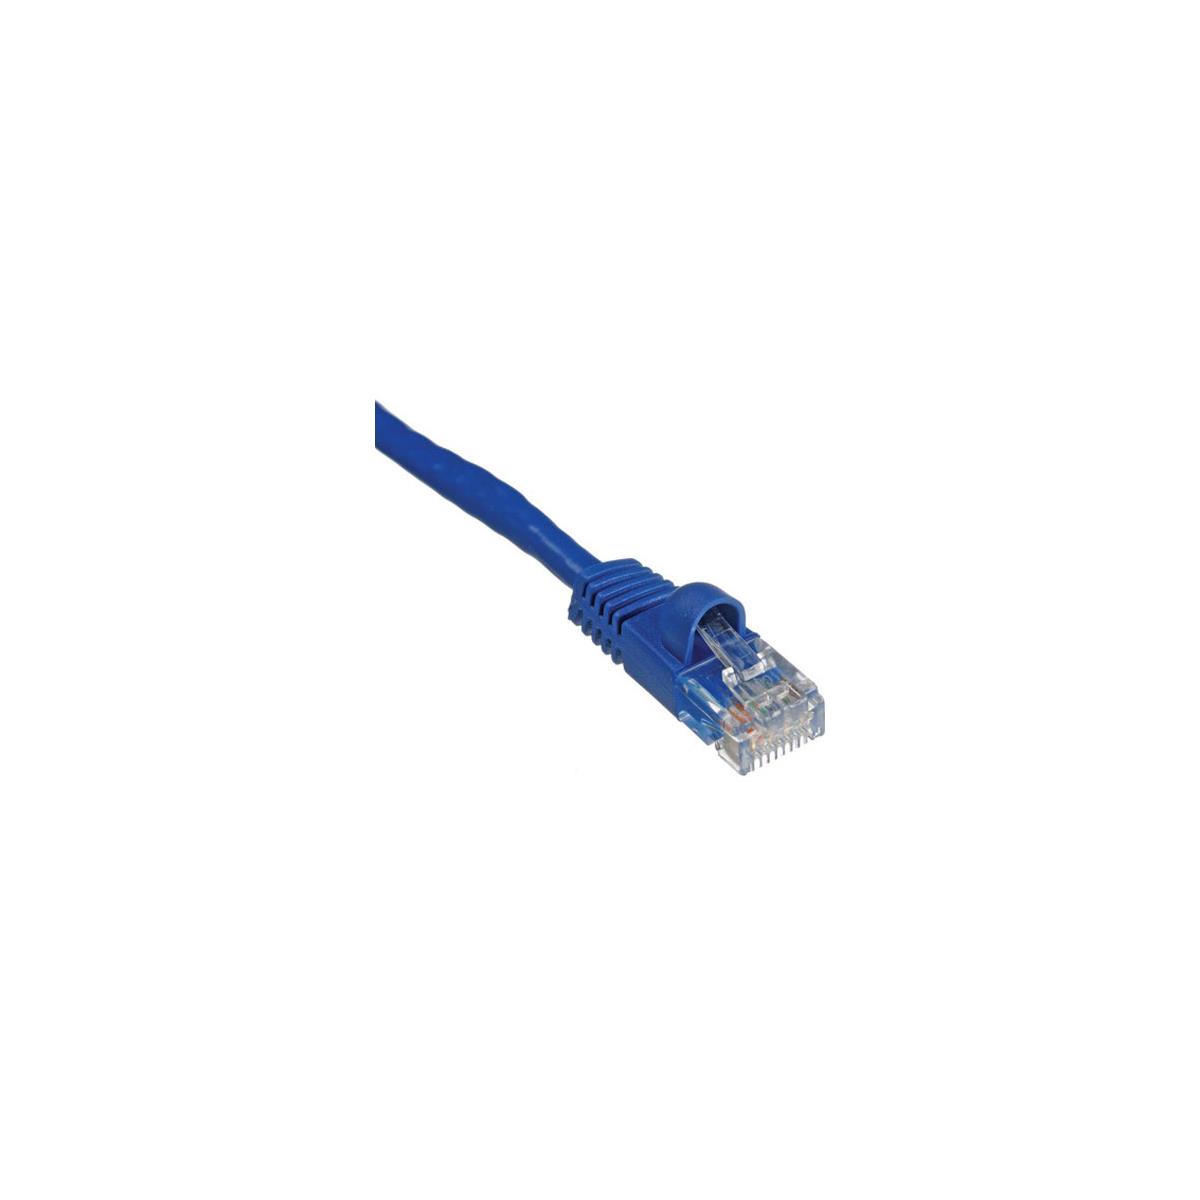 Photos - Other for Computer Comprehensive 25' Cat6 550 MHz Snagless Patch Cable, Blue CAT6-25BLU 